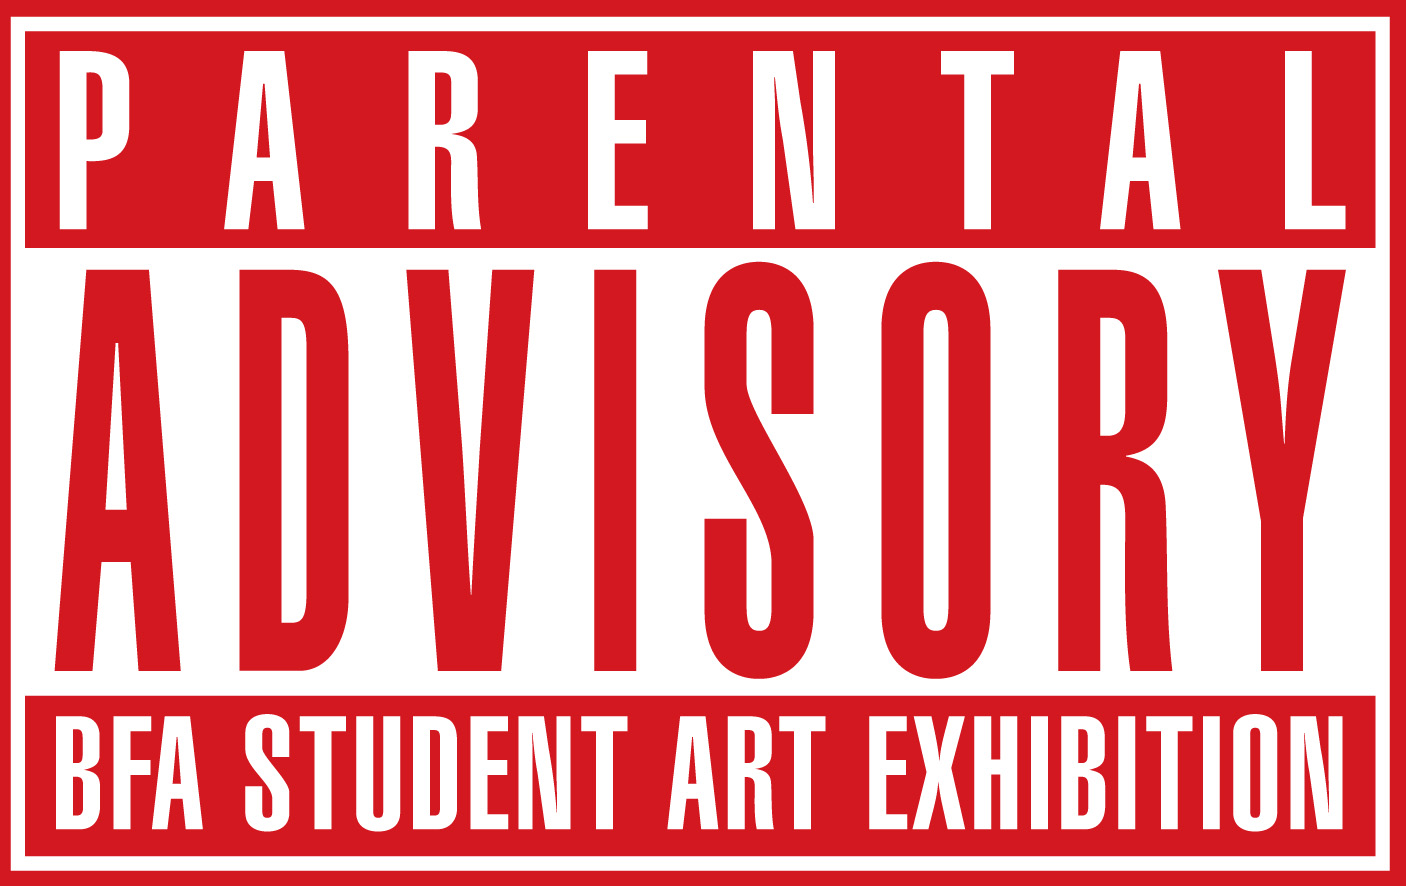 Gallery 210 to issue 'Parental Advisory' - UMSL Daily | UMSL Daily